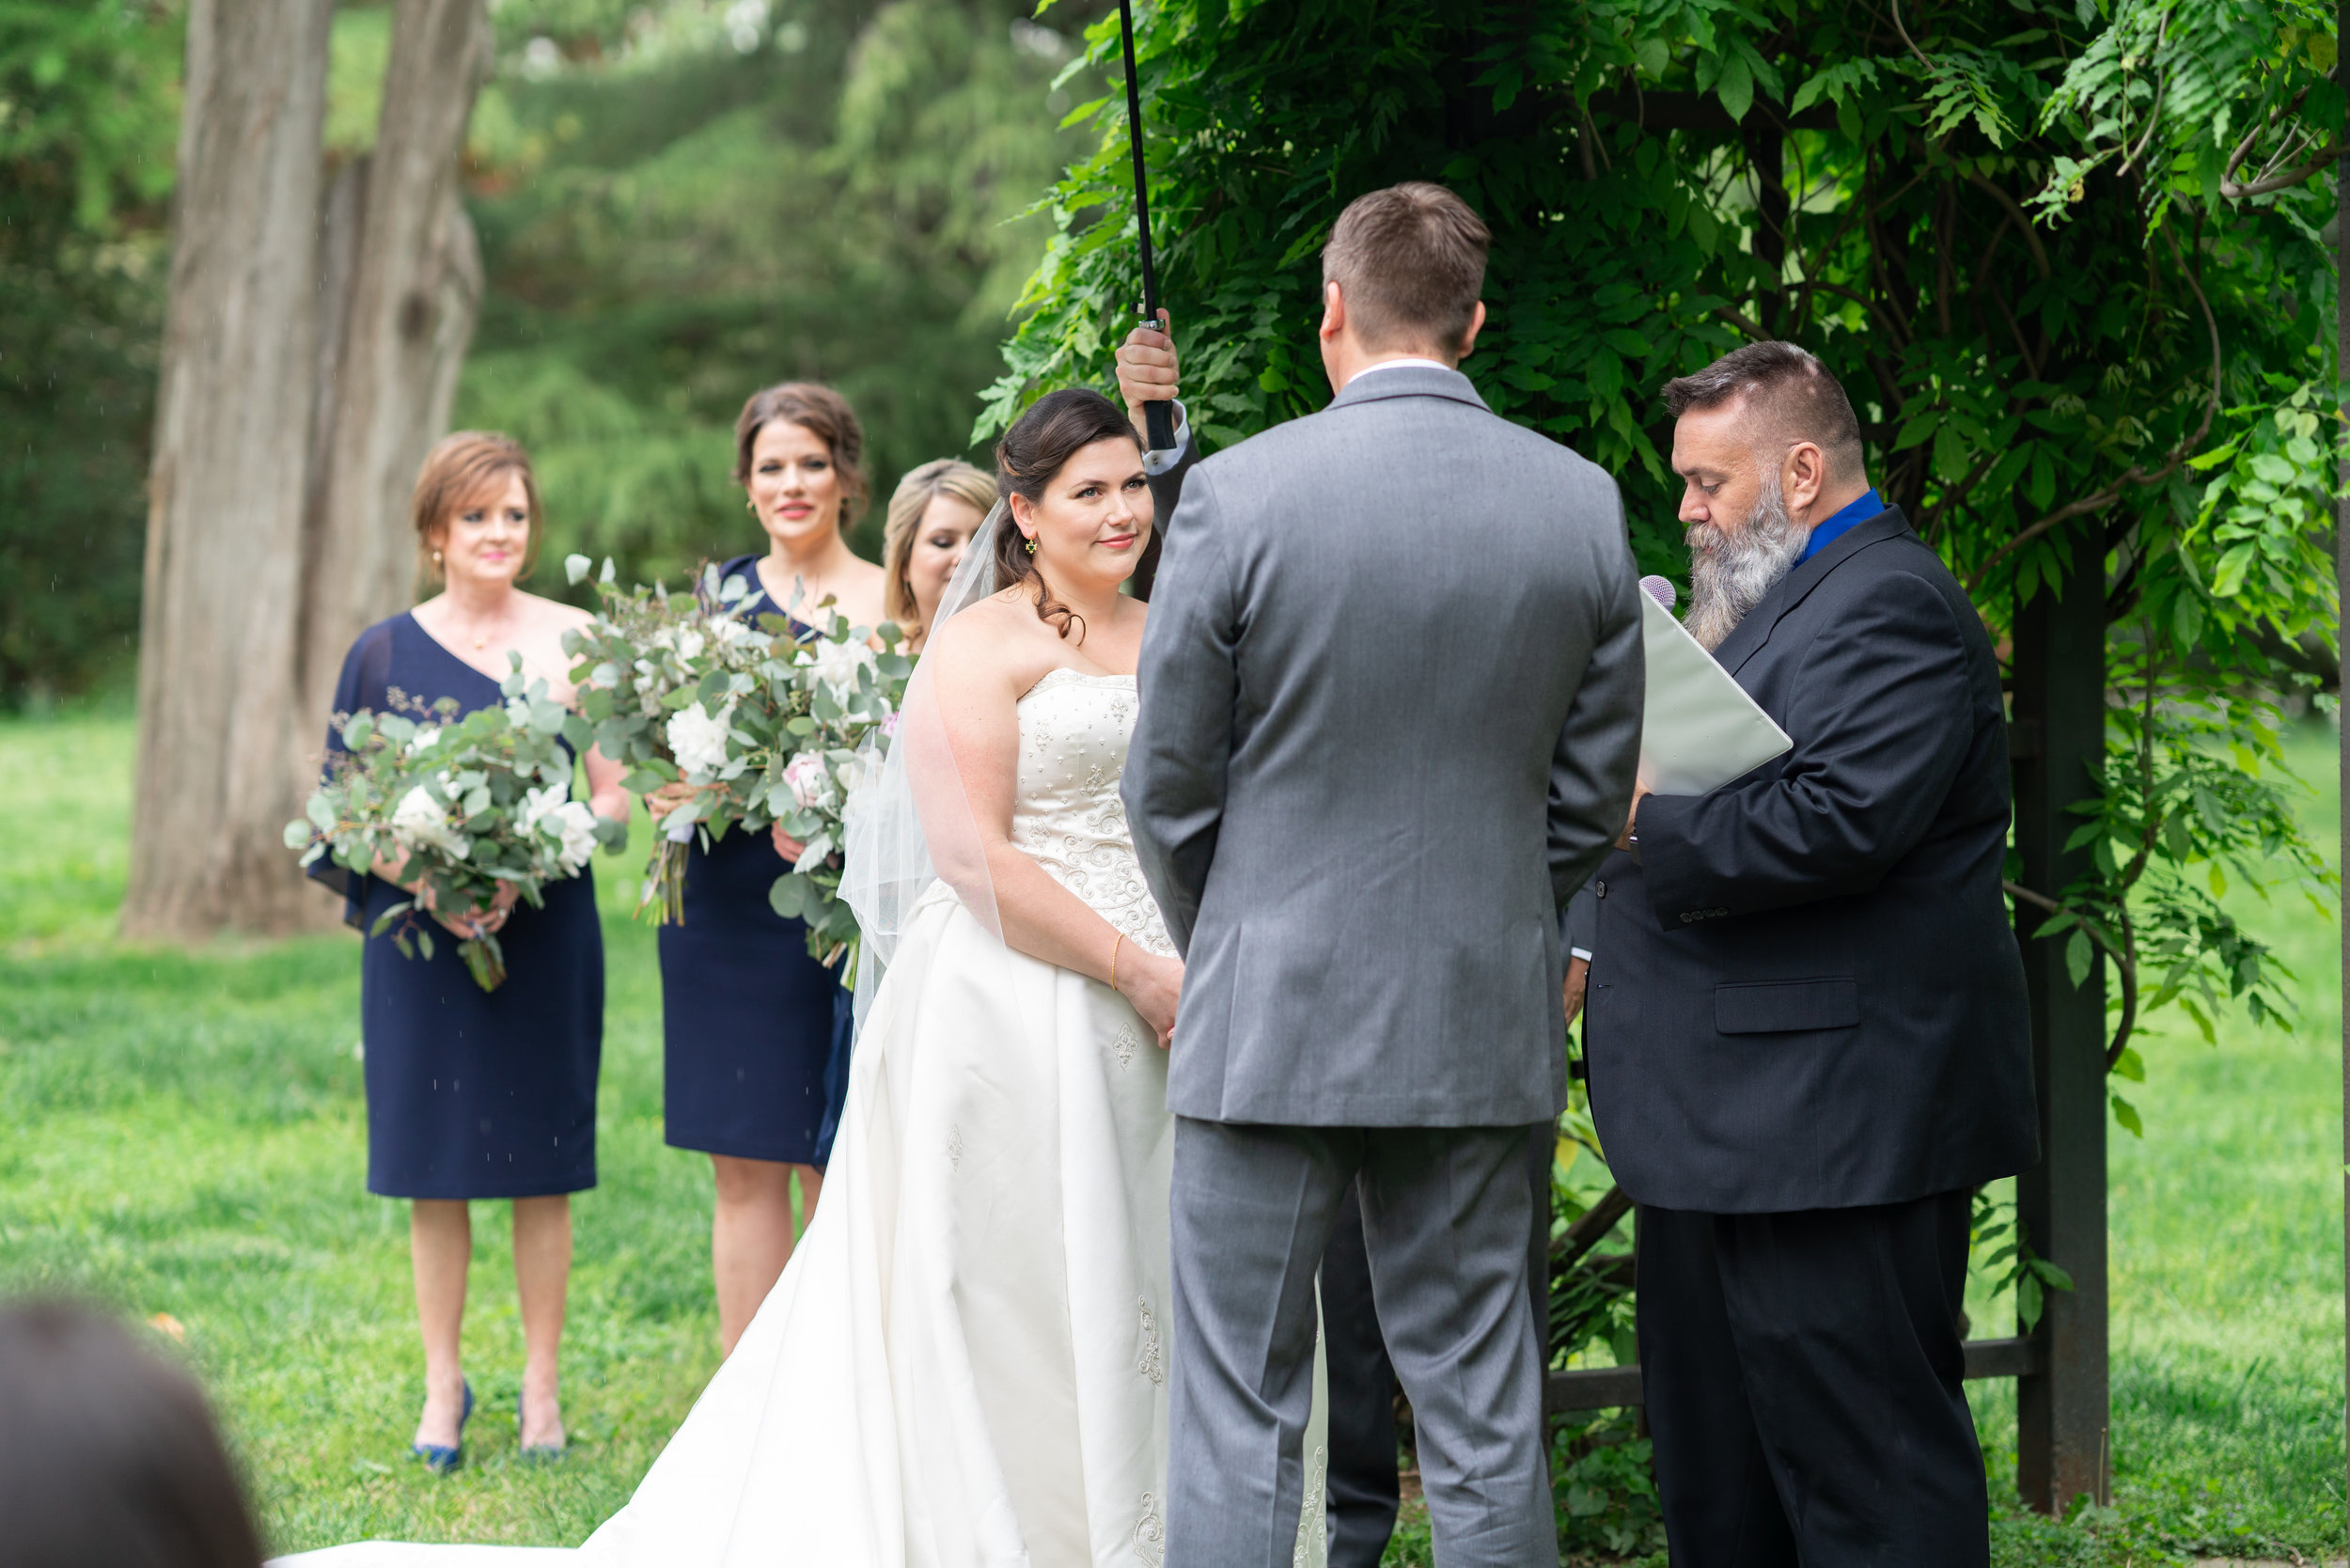 Ceremony under an ivy arch at Hendry House wedding